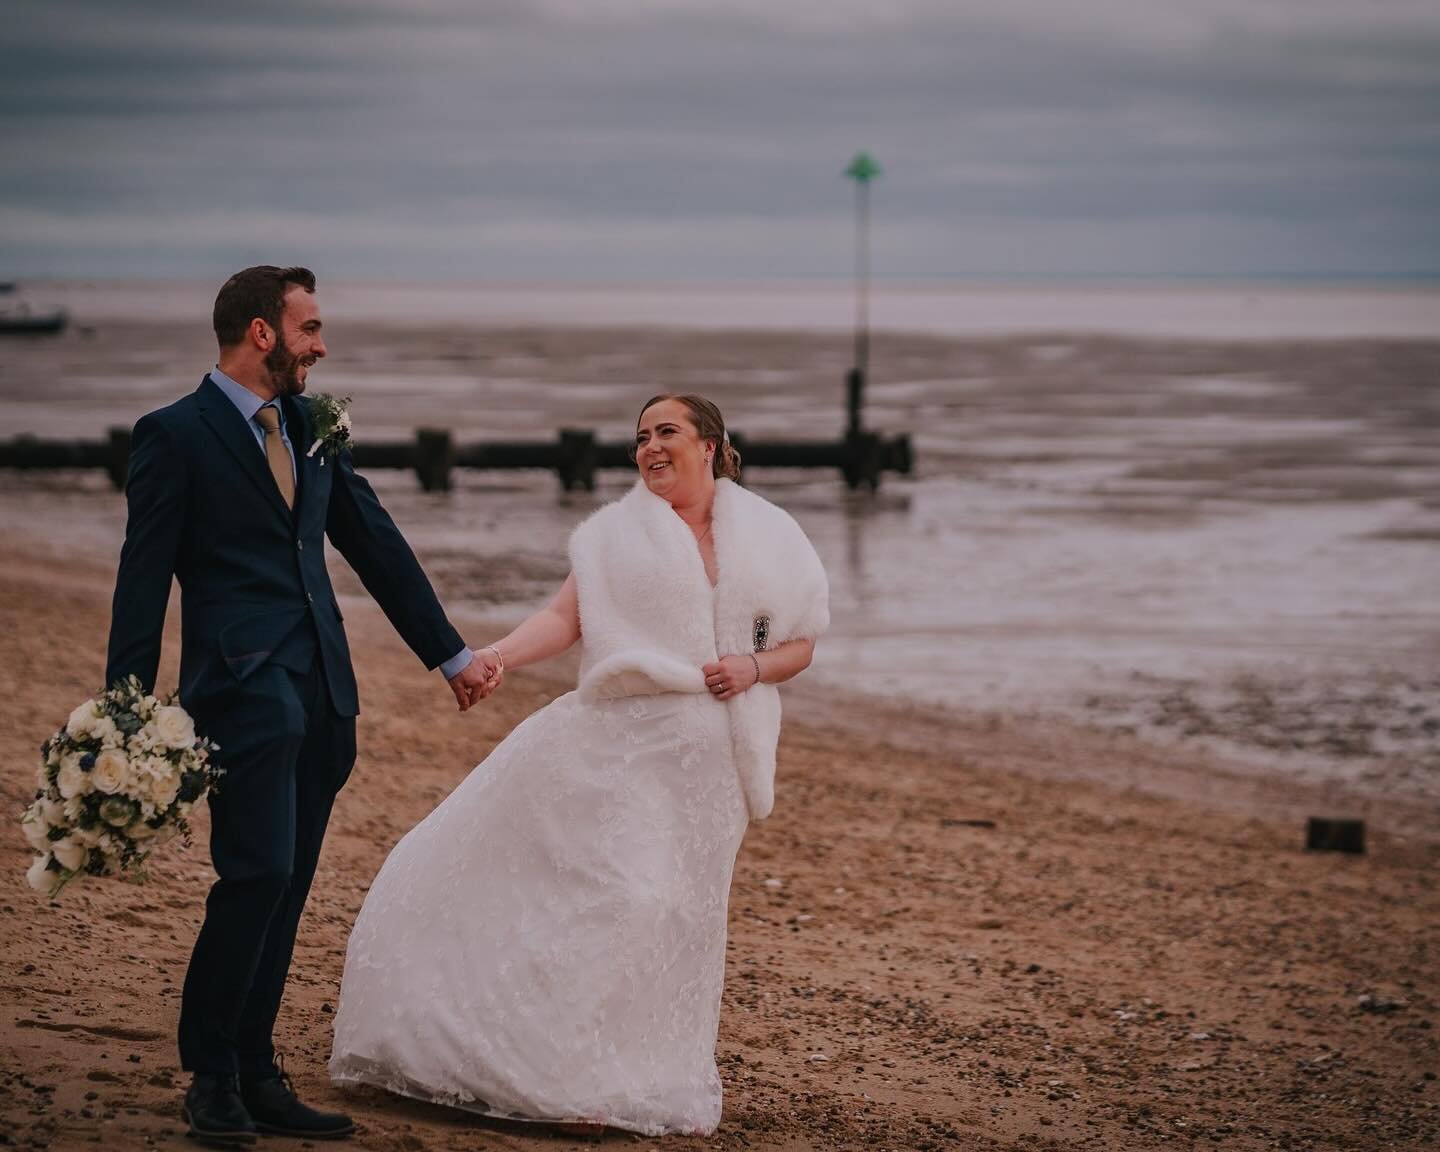 Ahhhhh Lizzie &amp; El&hellip; what more can I say 🤩
The absolute best start to the year, despite needing thermals on that beach 😅
Loved every second, thanks so much for having me 🖤

SUPPLIERS:
@momentstomemoriescontent 
@weddingsbyroslin 
@mrspot